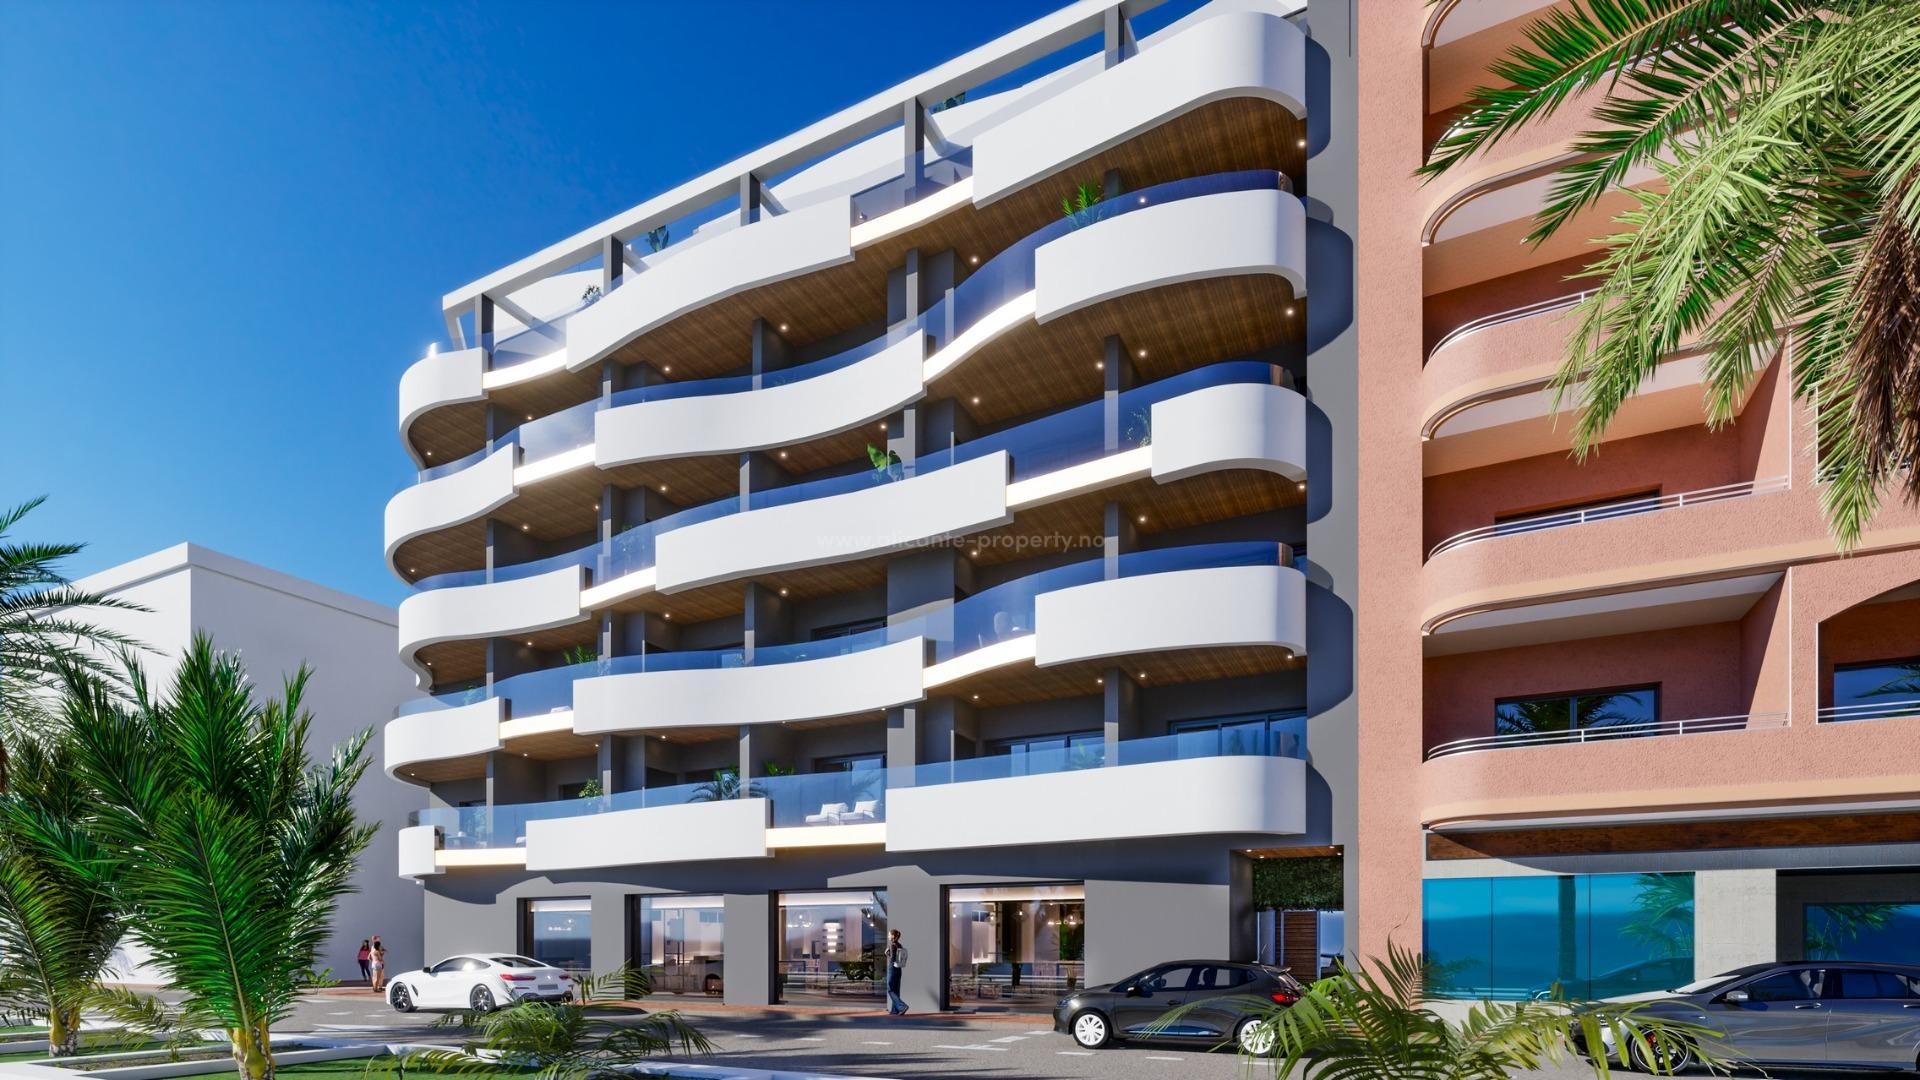 Modern penthouses in Torrevieja at Habaneras, fantastic panoramic views from the heart of Torrevieja, 2 bedrooms, 2 bathrooms